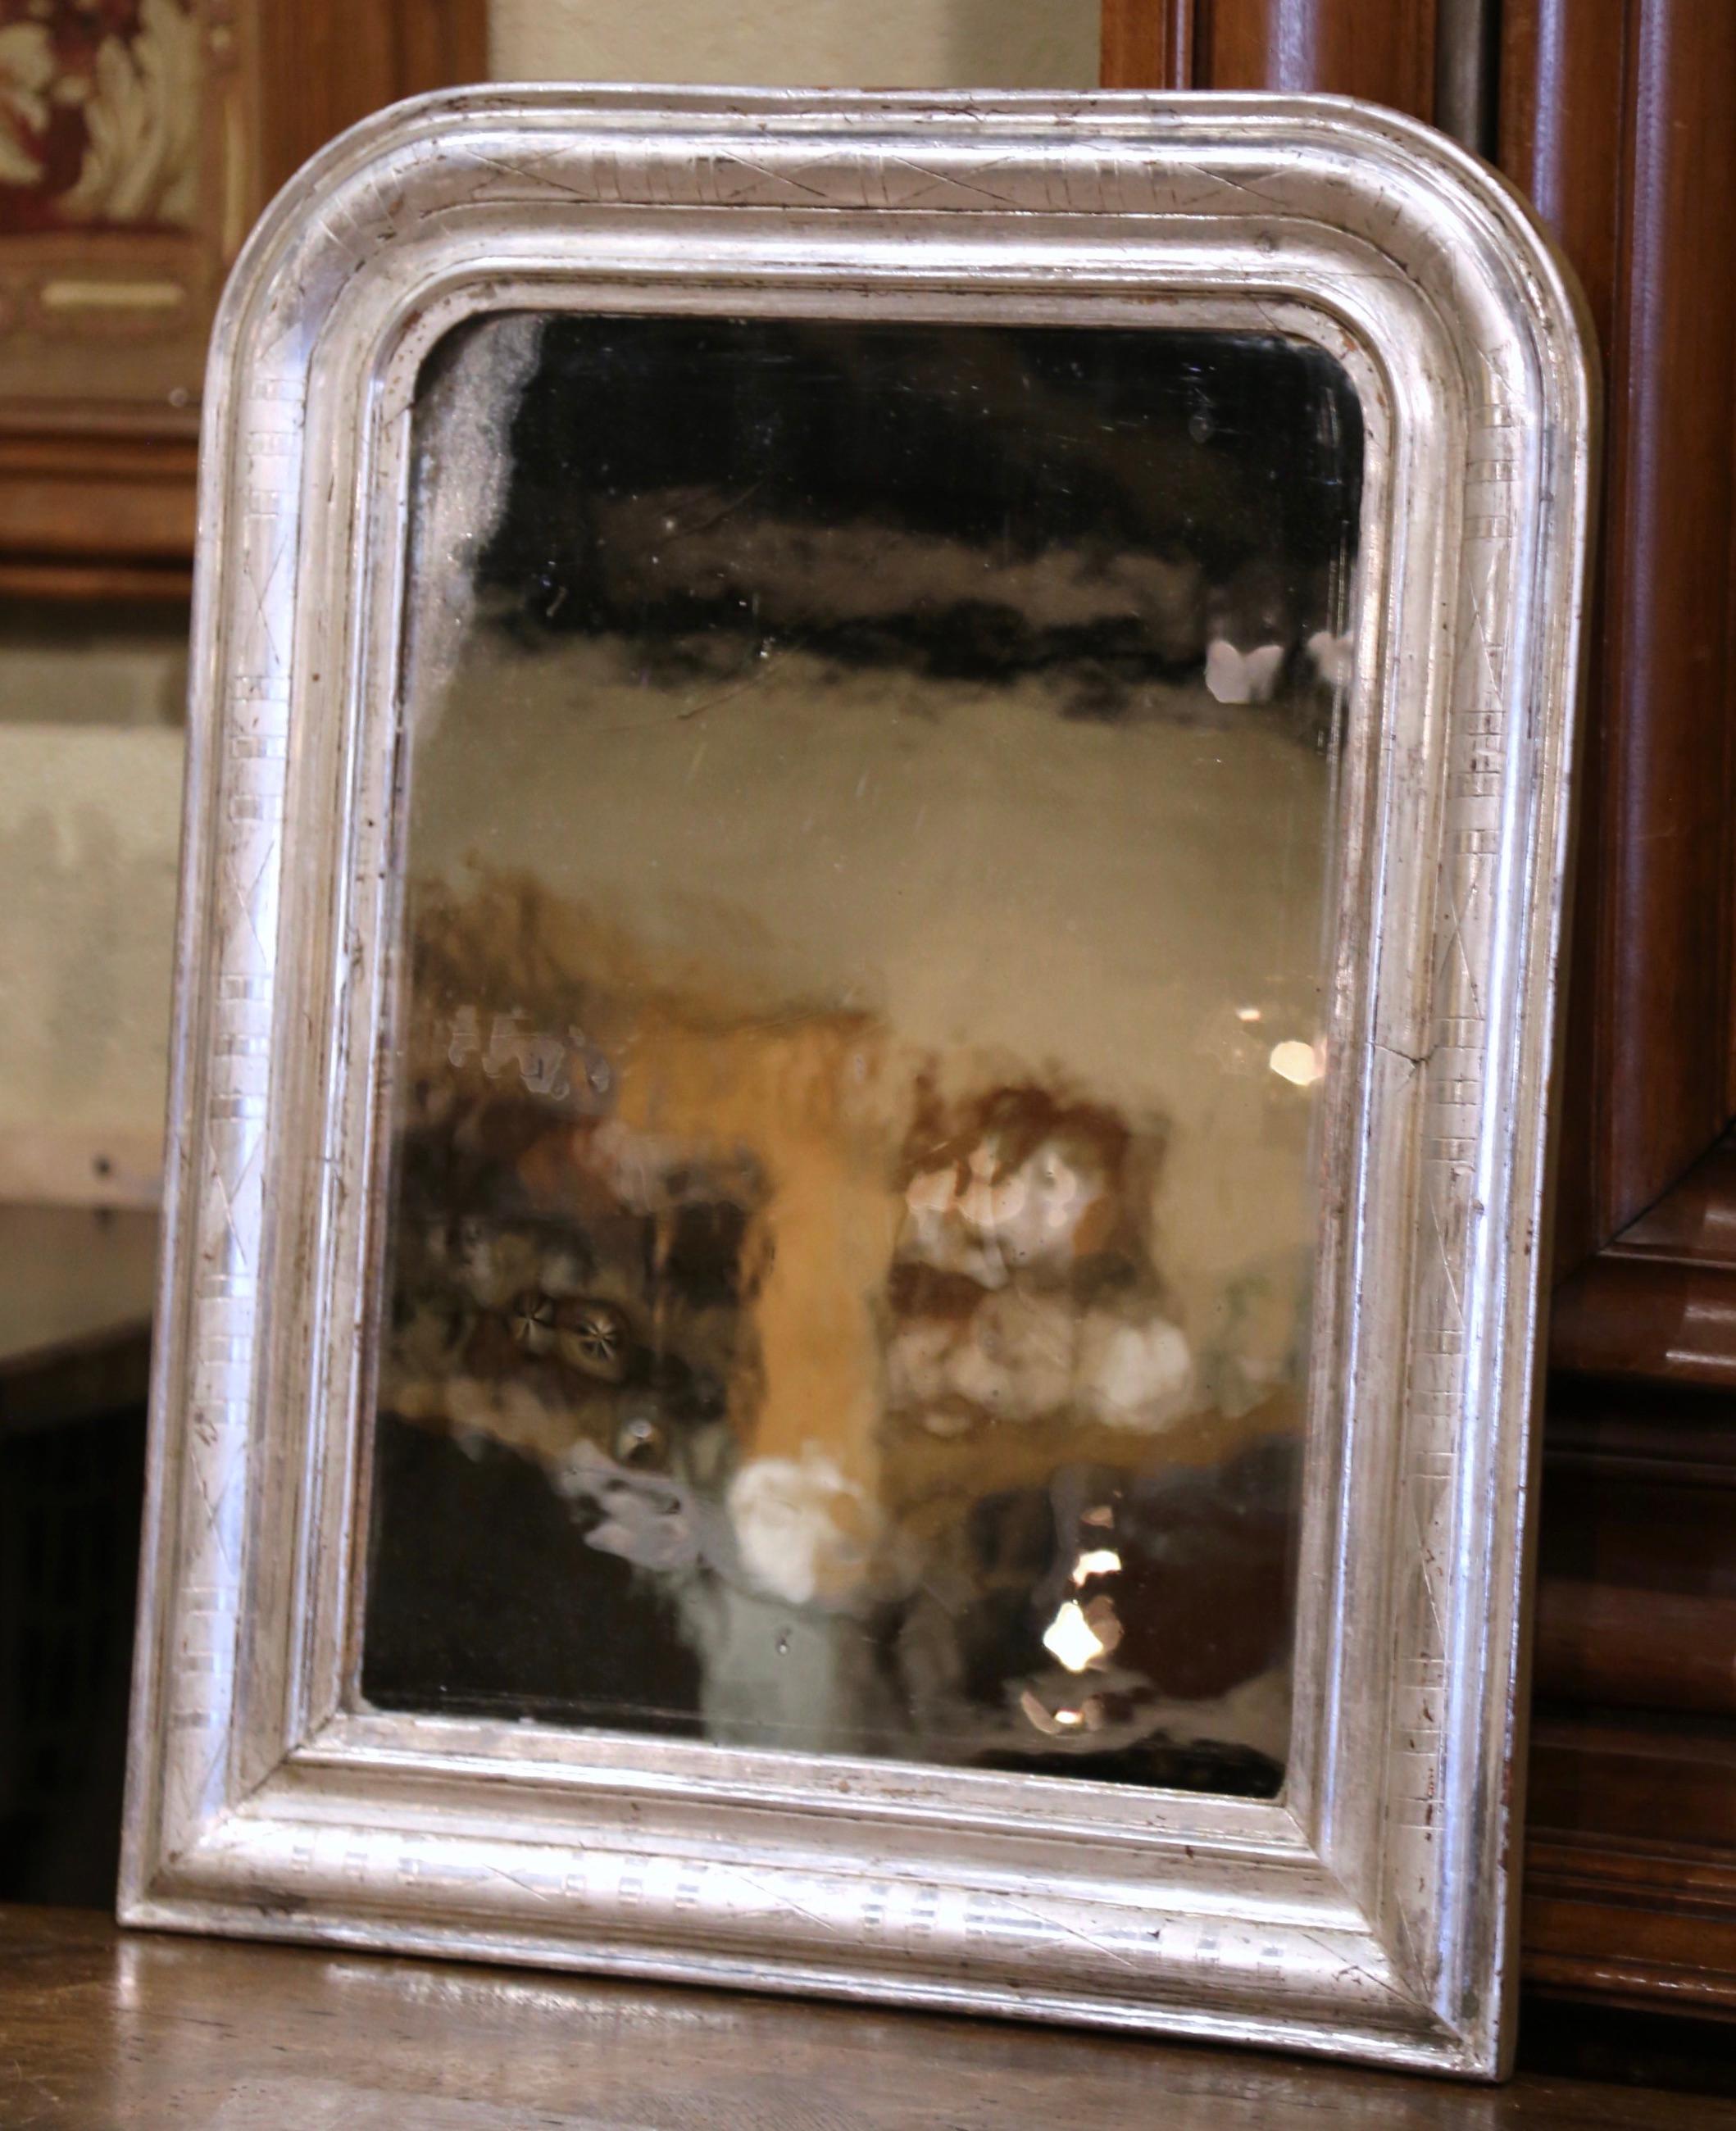 Crafted in the Burgundy region of France, circa 1870, the small antique mirror has traditional, timeless lines with rounded corners. The elegant frame is decorated with a luxurious silver leaf finish, further embellished with an engraved two-tone